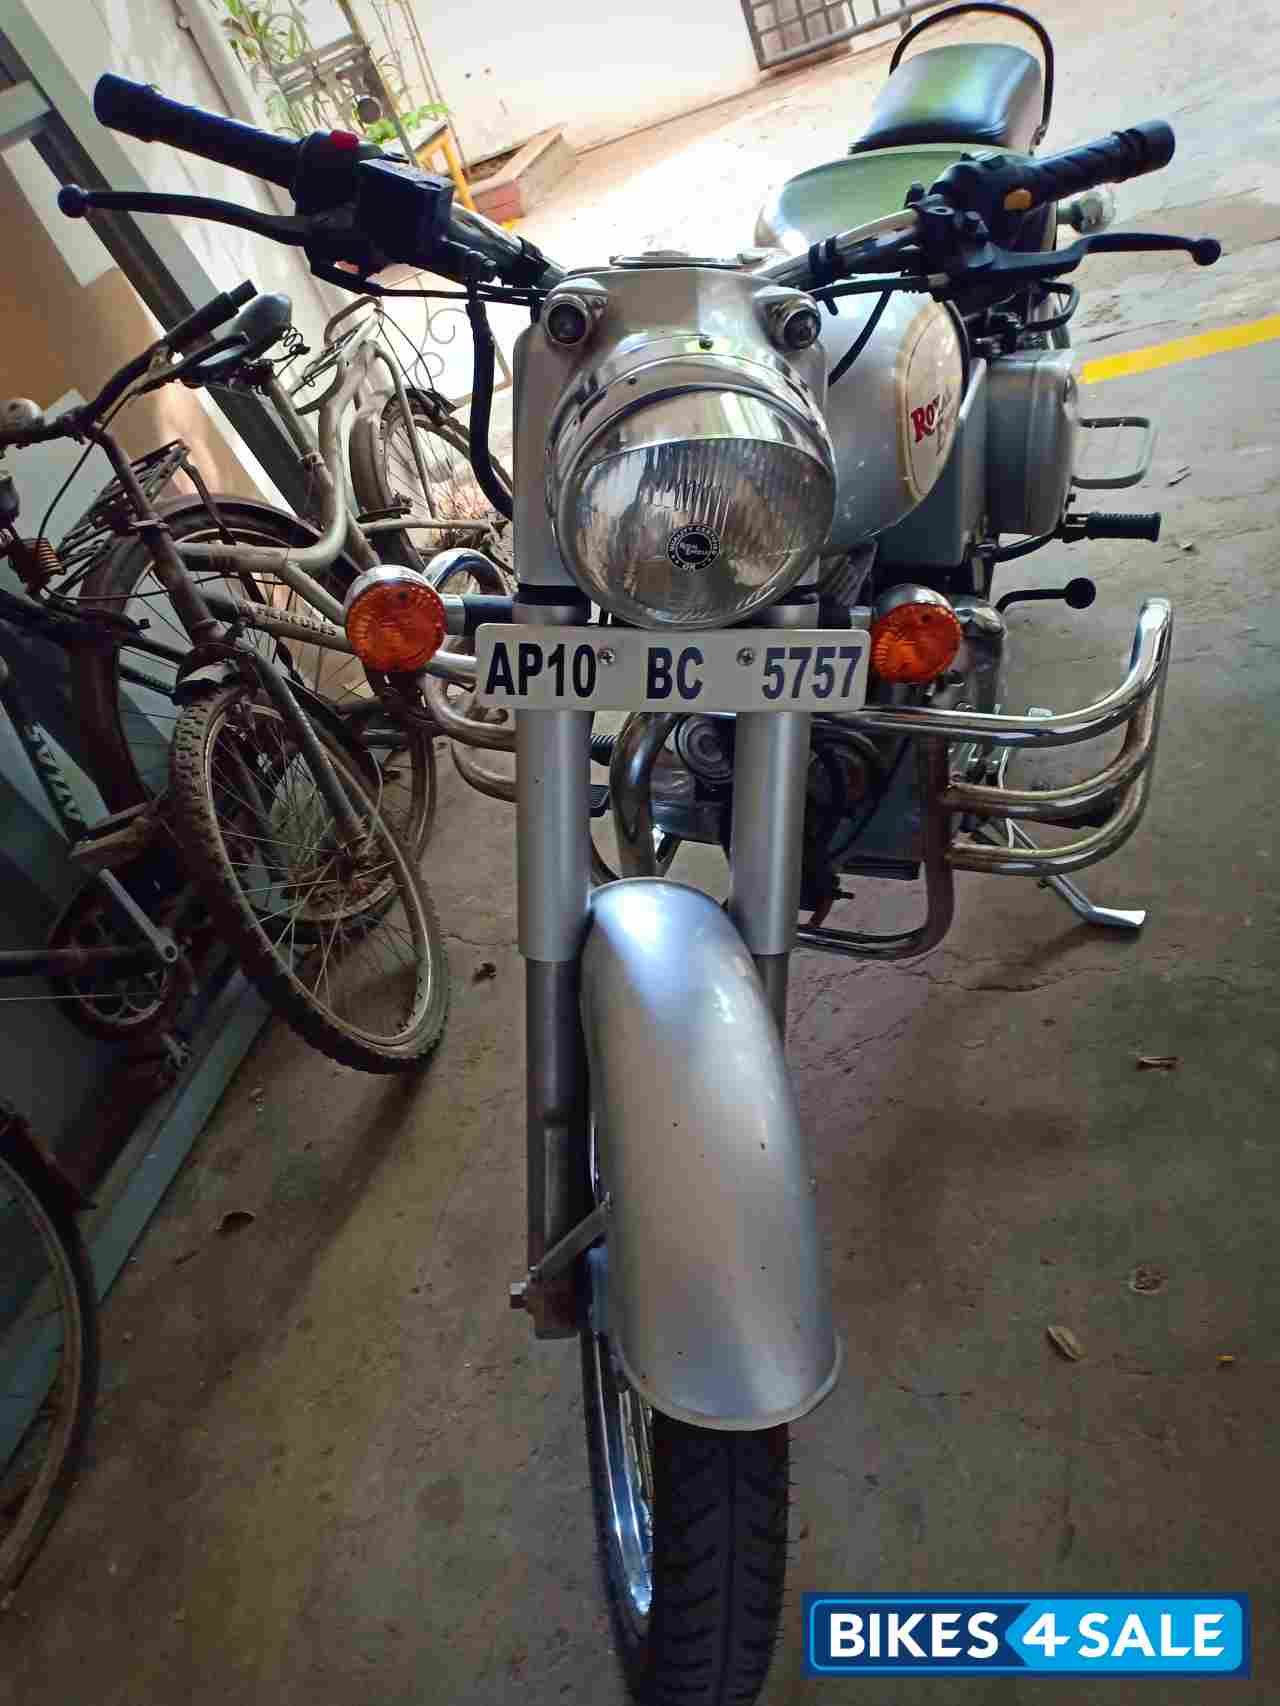 Silver Royal Enfield Classic